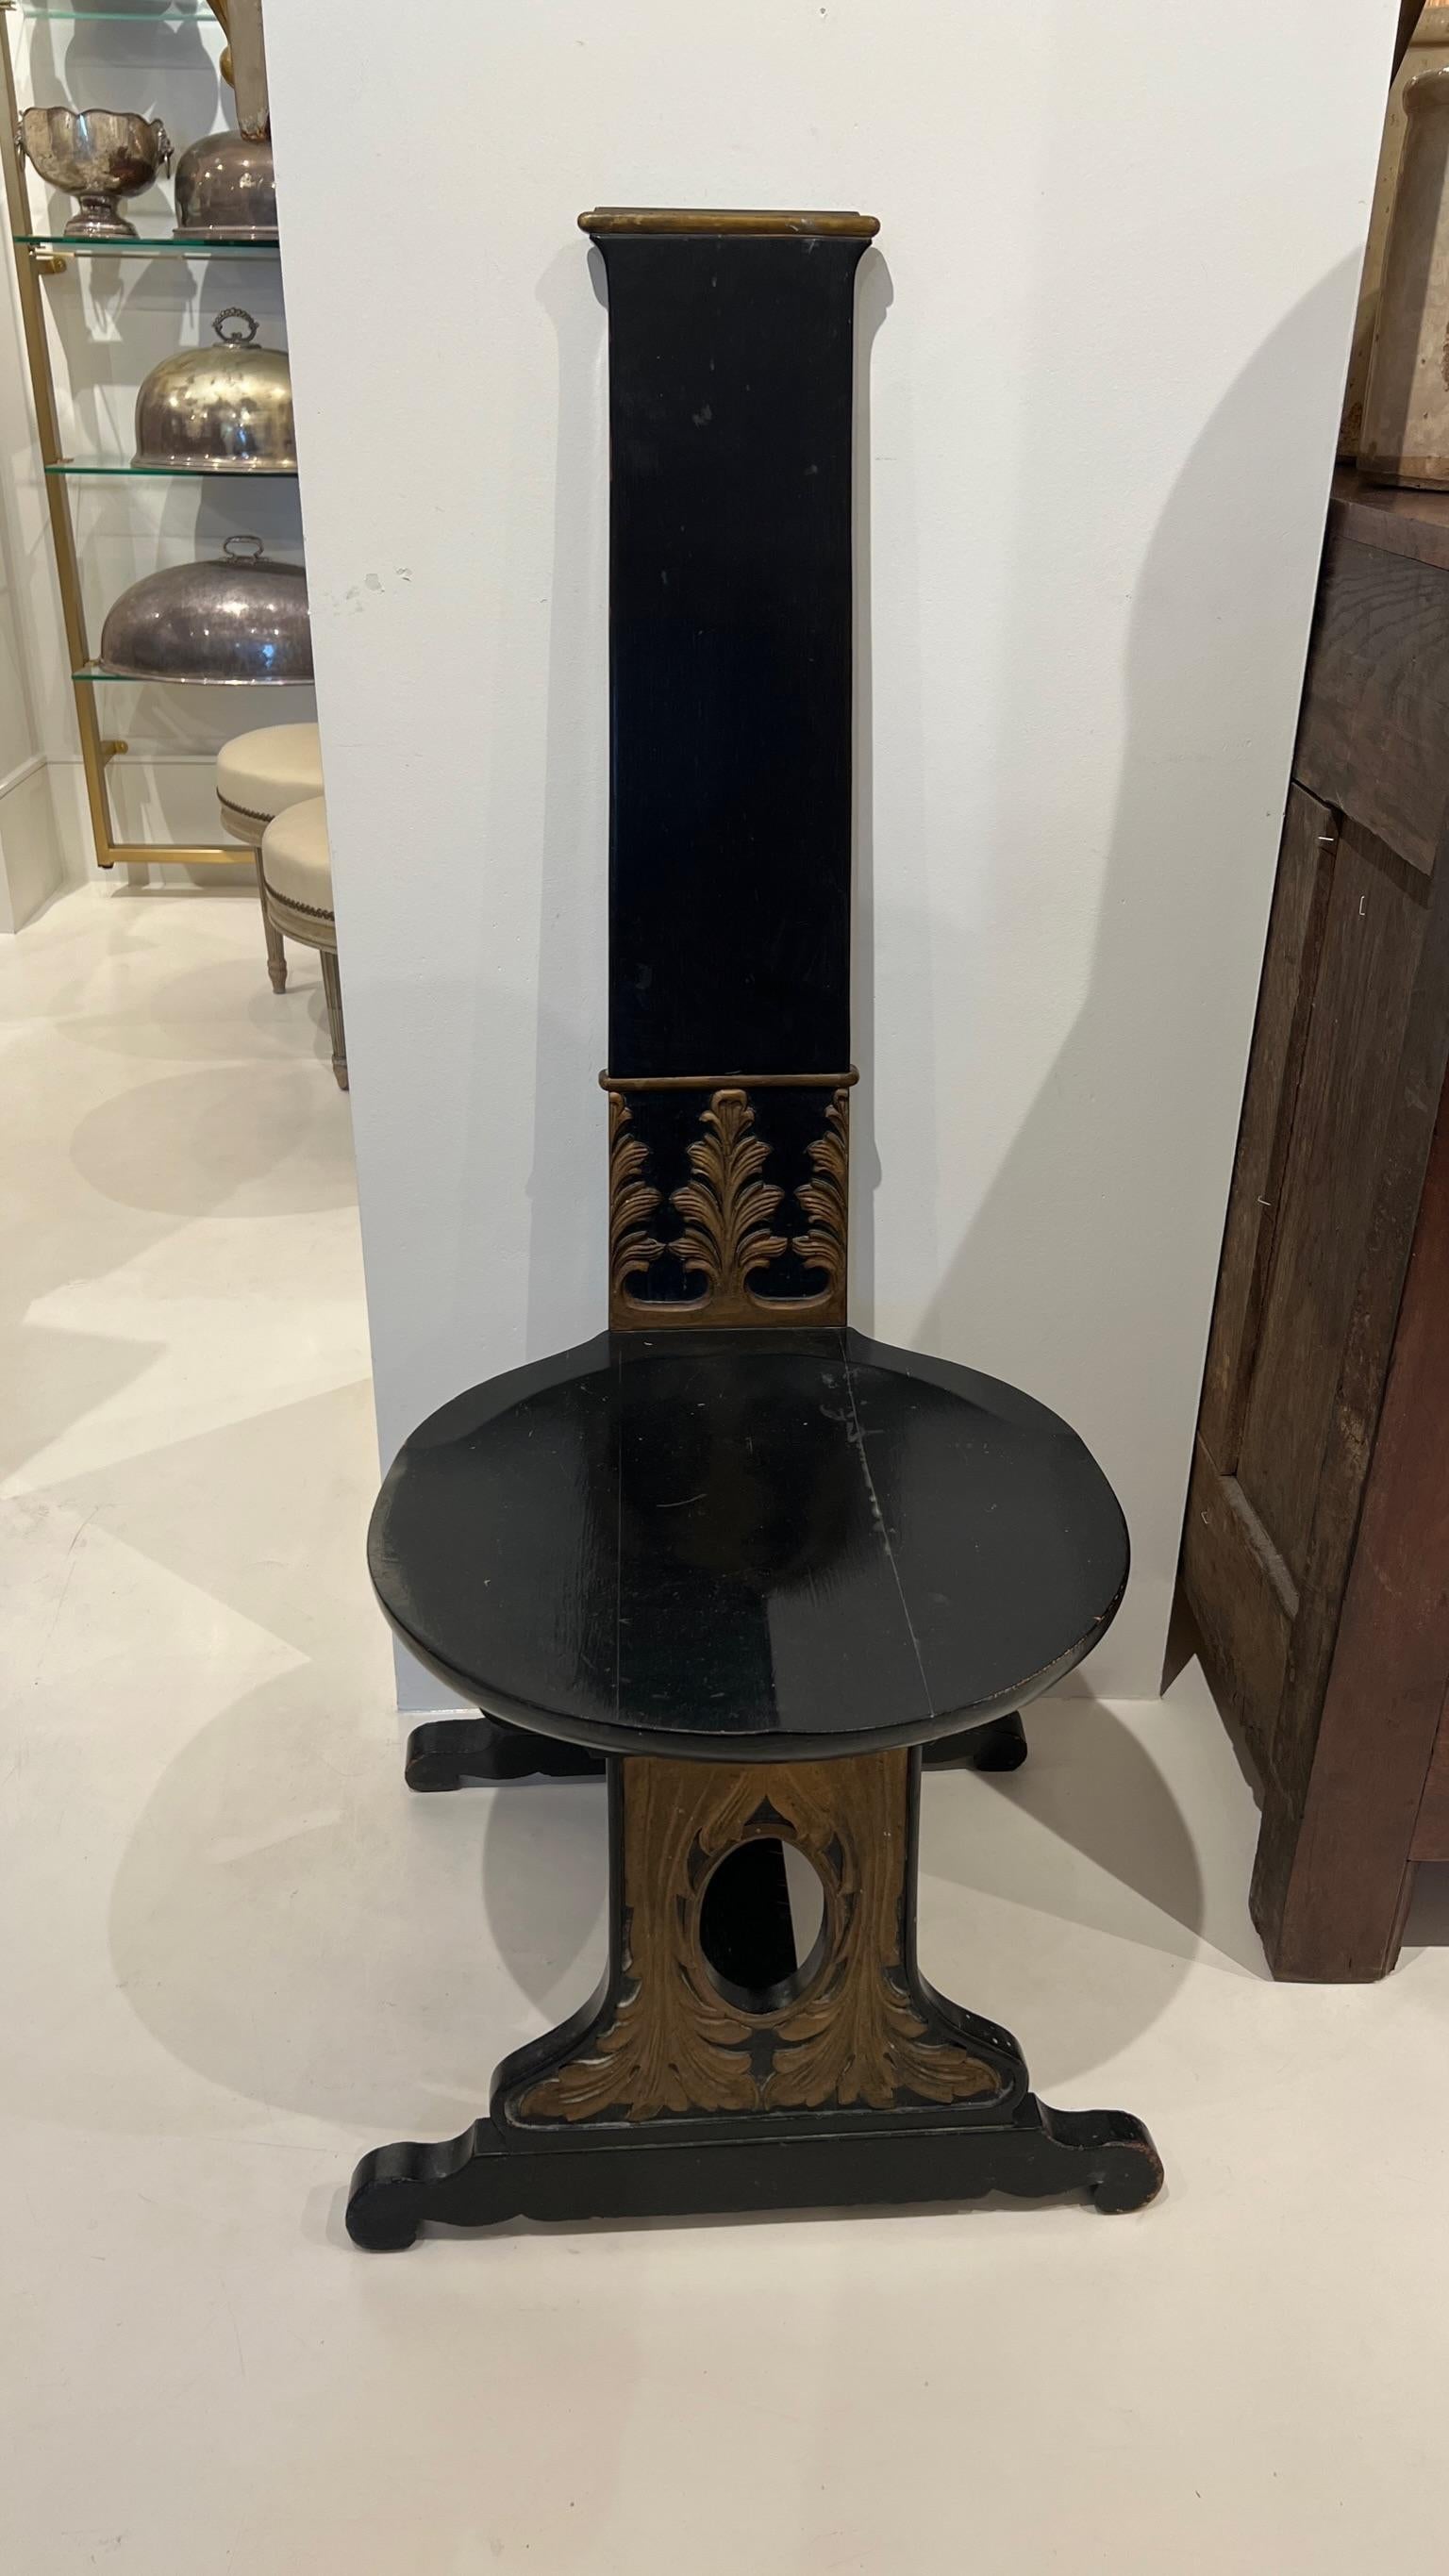 This is a charming pull-up chair with many unique features. It’s small enough to fit in any niche, but has a generous and surprisingly comfortable seat. Painted glossy black with gold accents, the design of the chair is very special. It is